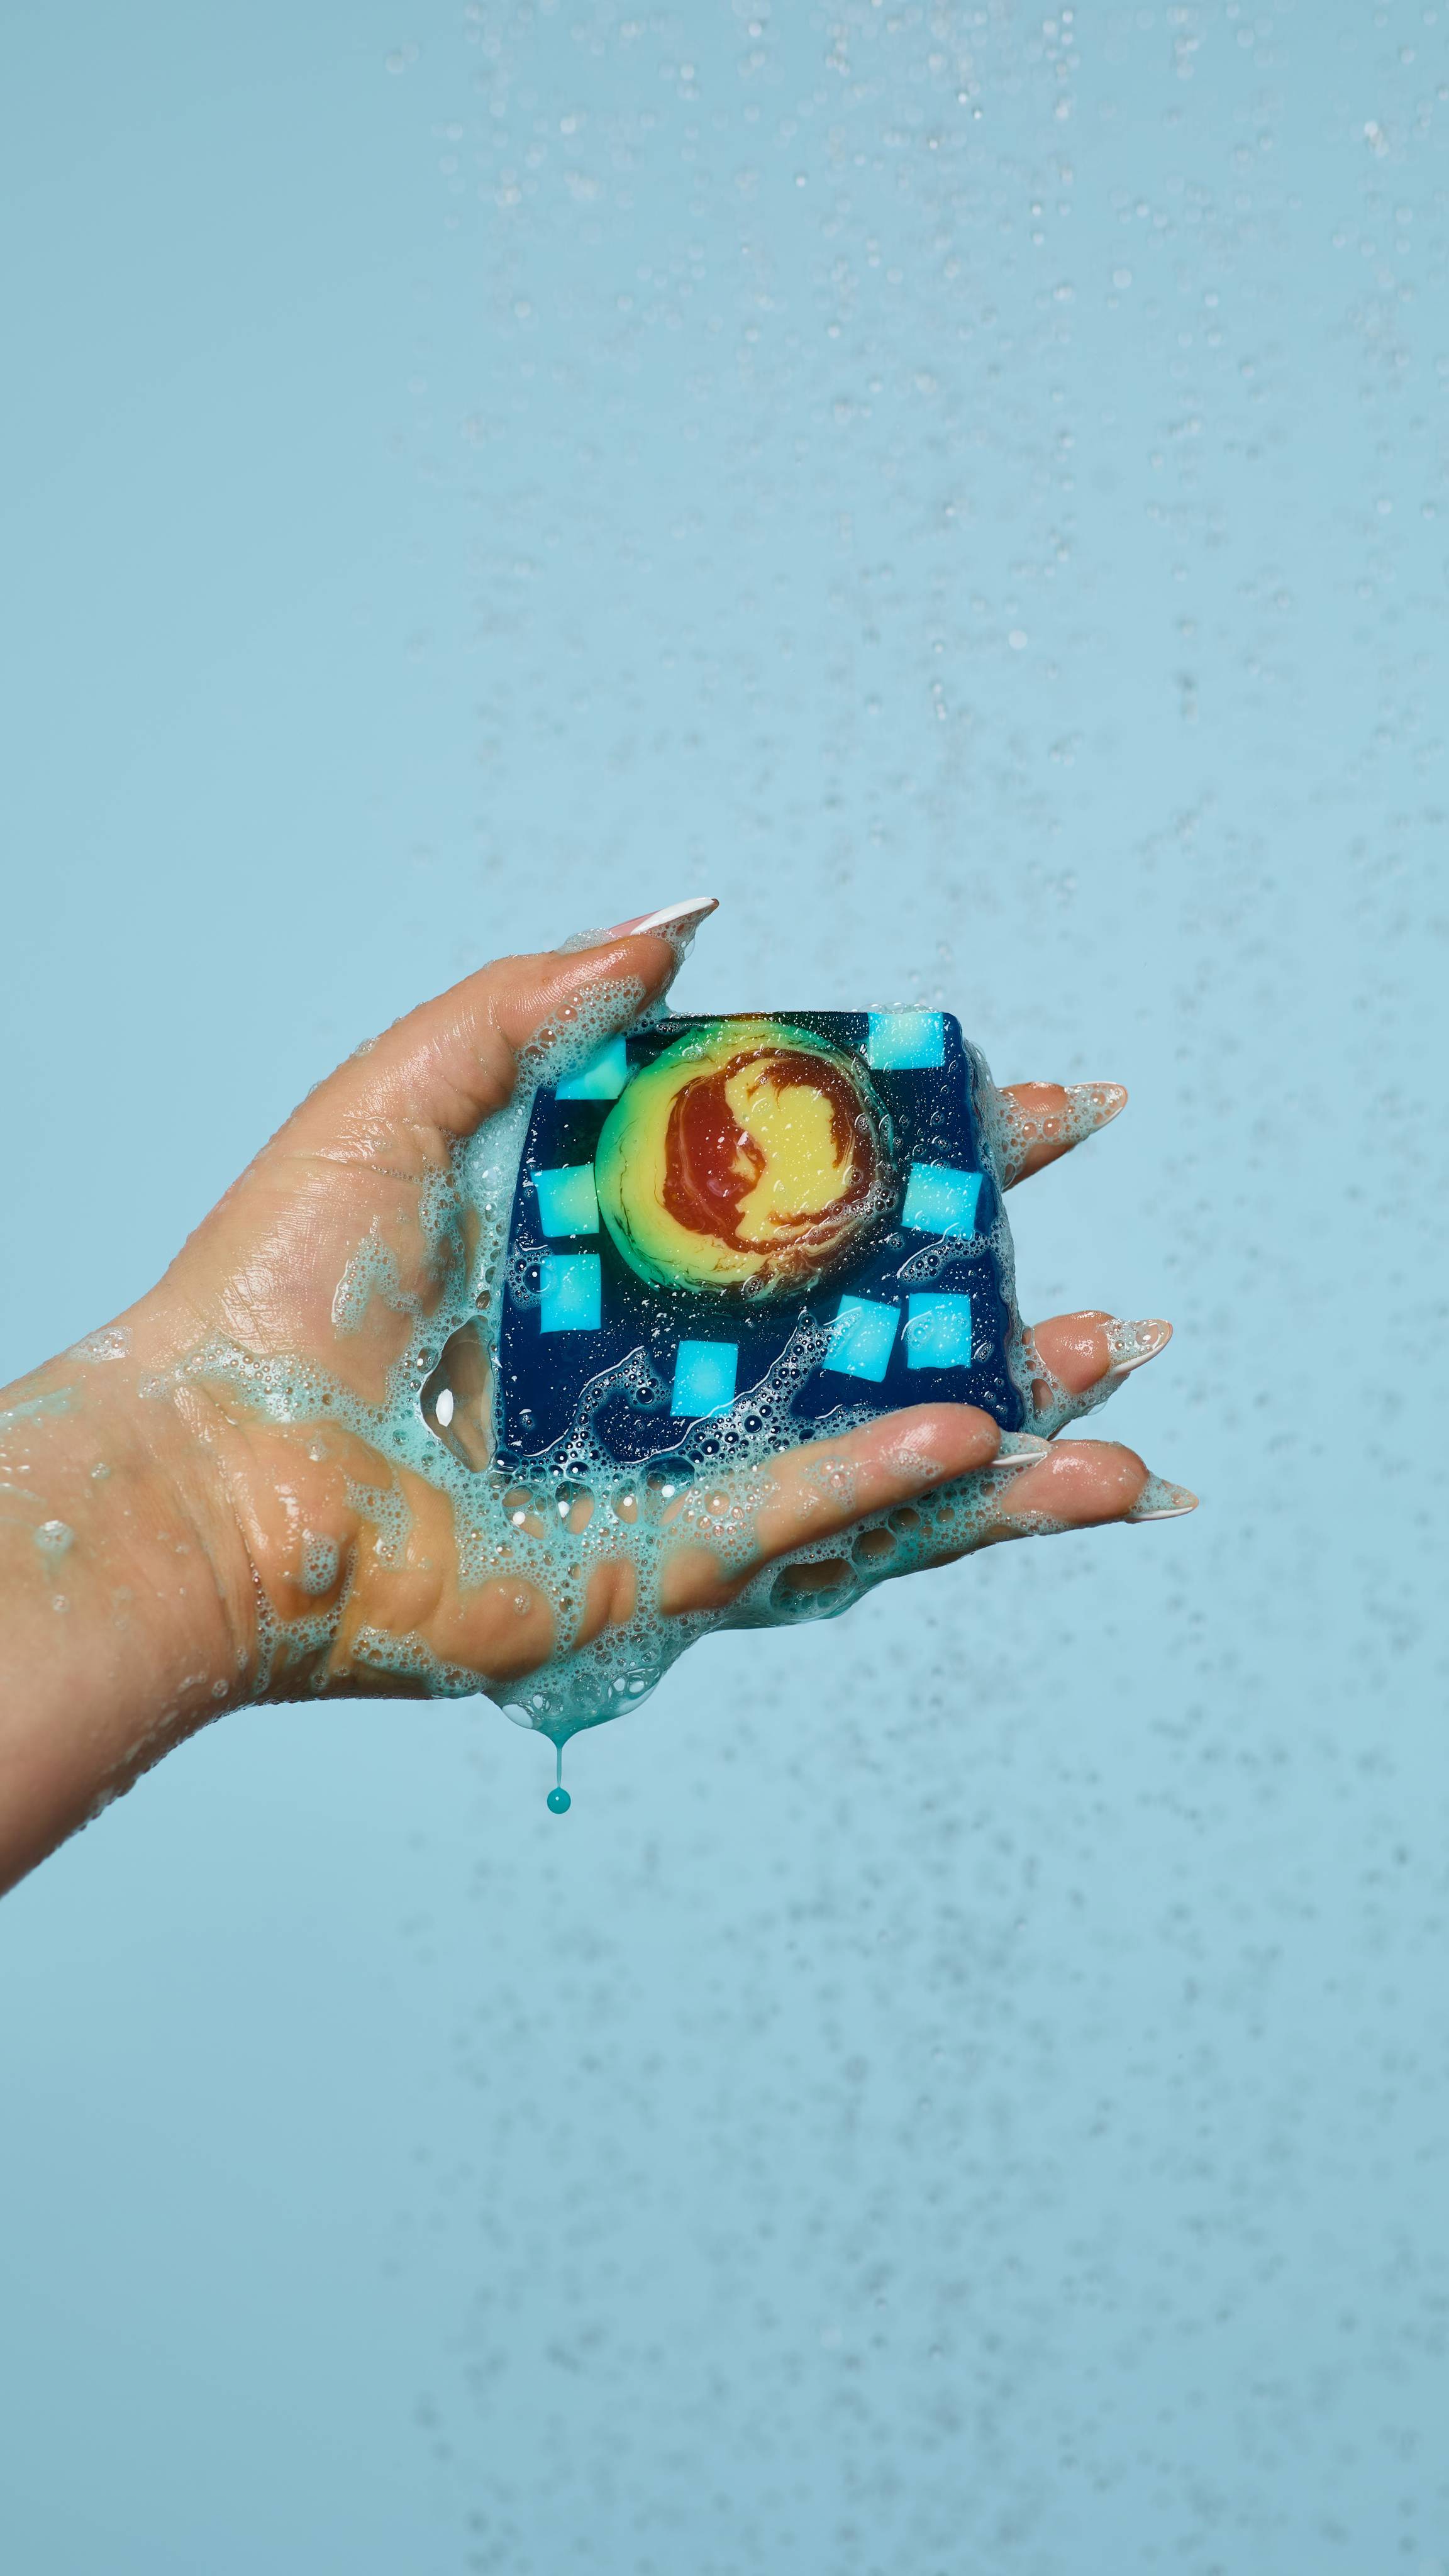 A close-up of the model's hand, lathered up with blue, soapy suds while holding the Alban Arthan soap. Water is falling from above and there is a pale blue background.